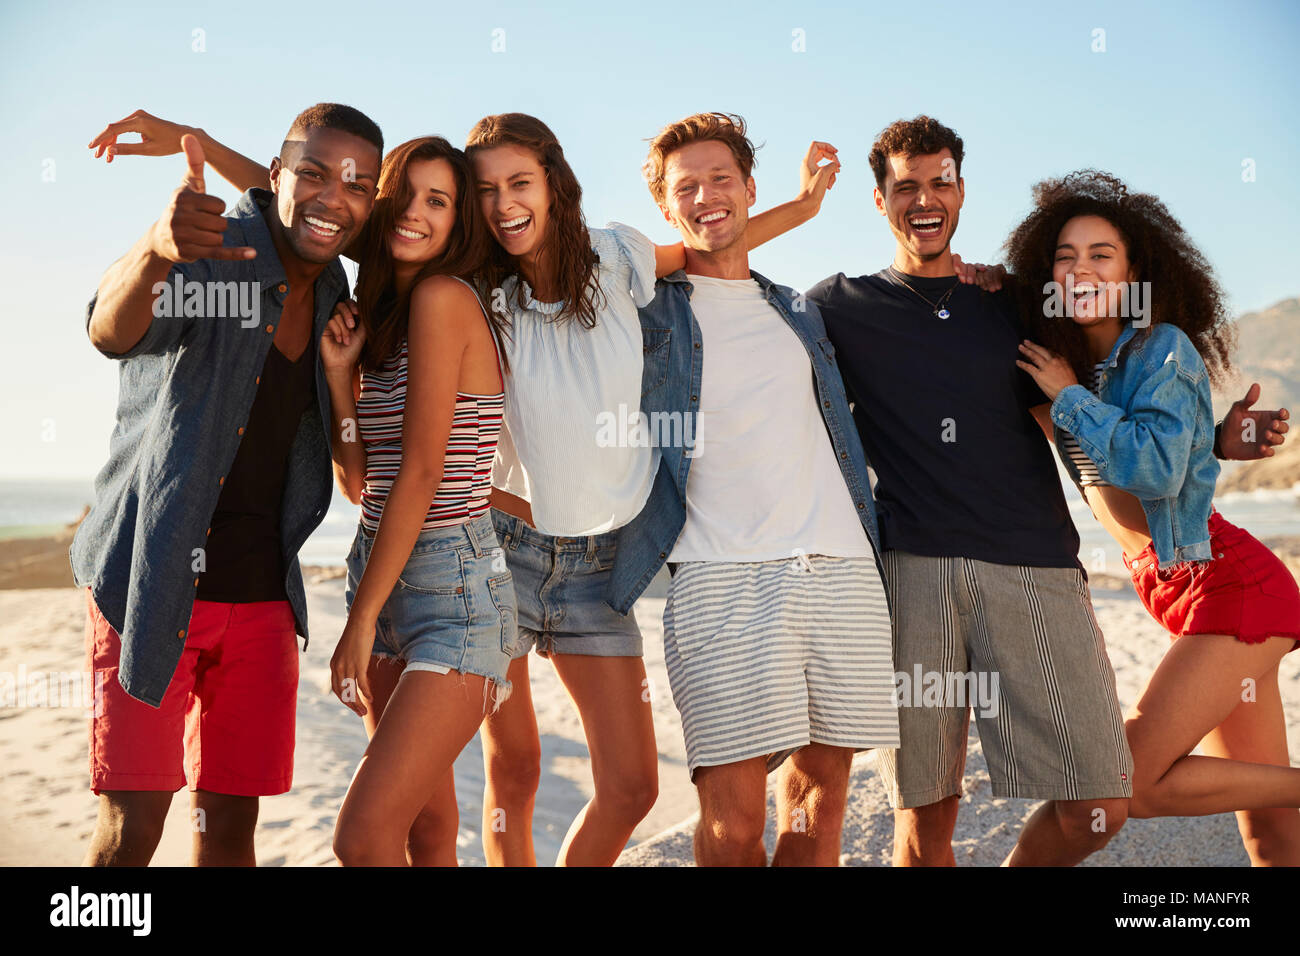 Portrait Of Friends Having Fun Together On Beach Vacation Stock Photo